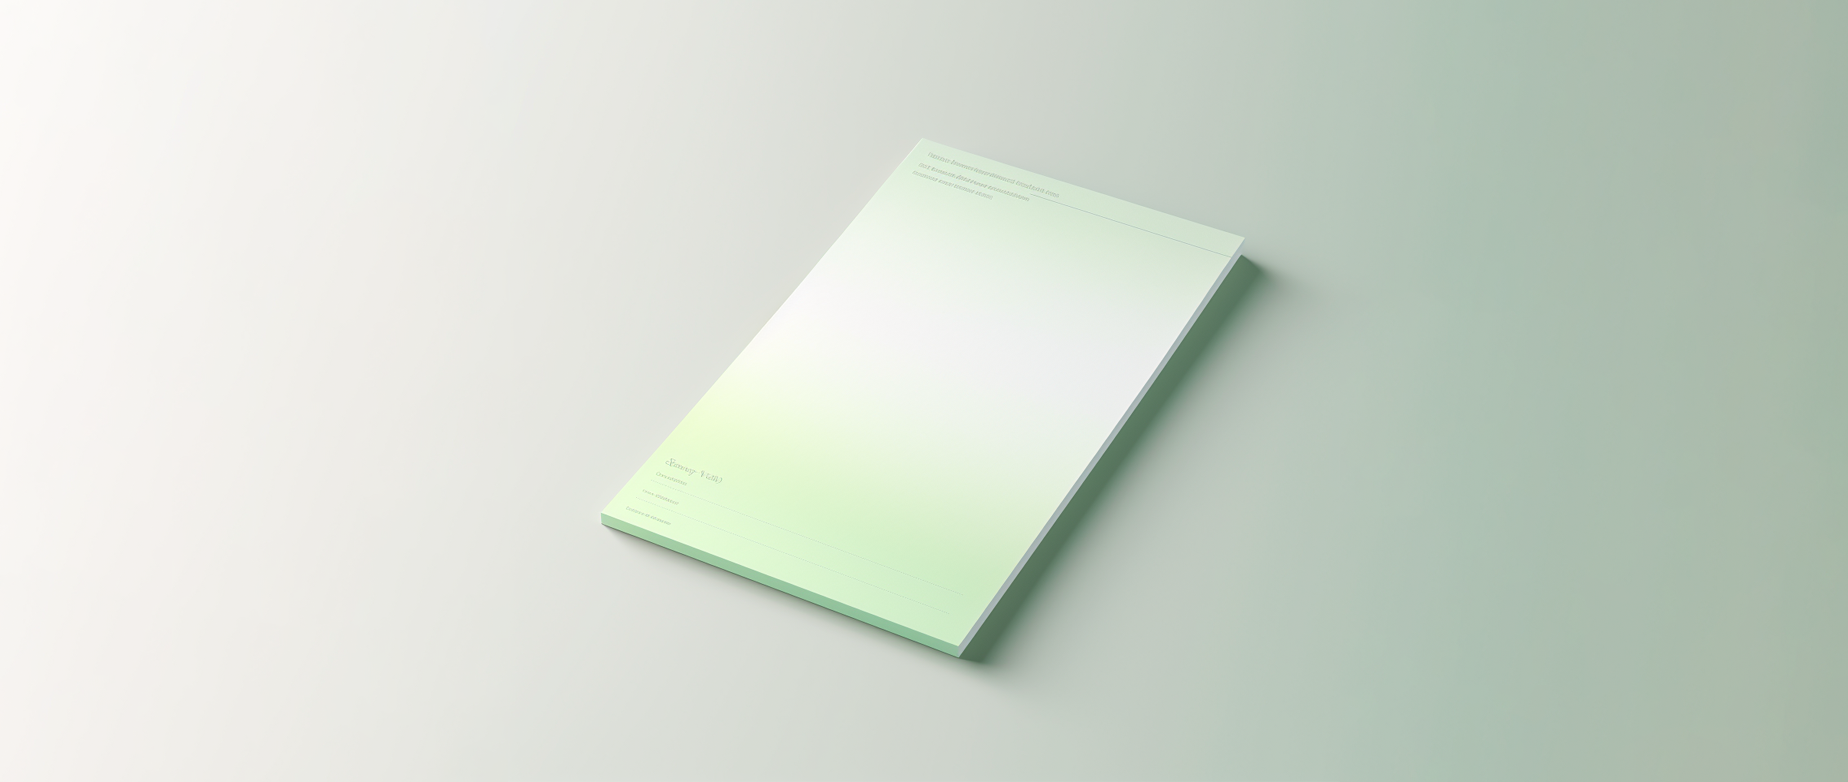 a blank notepad: single step income statement